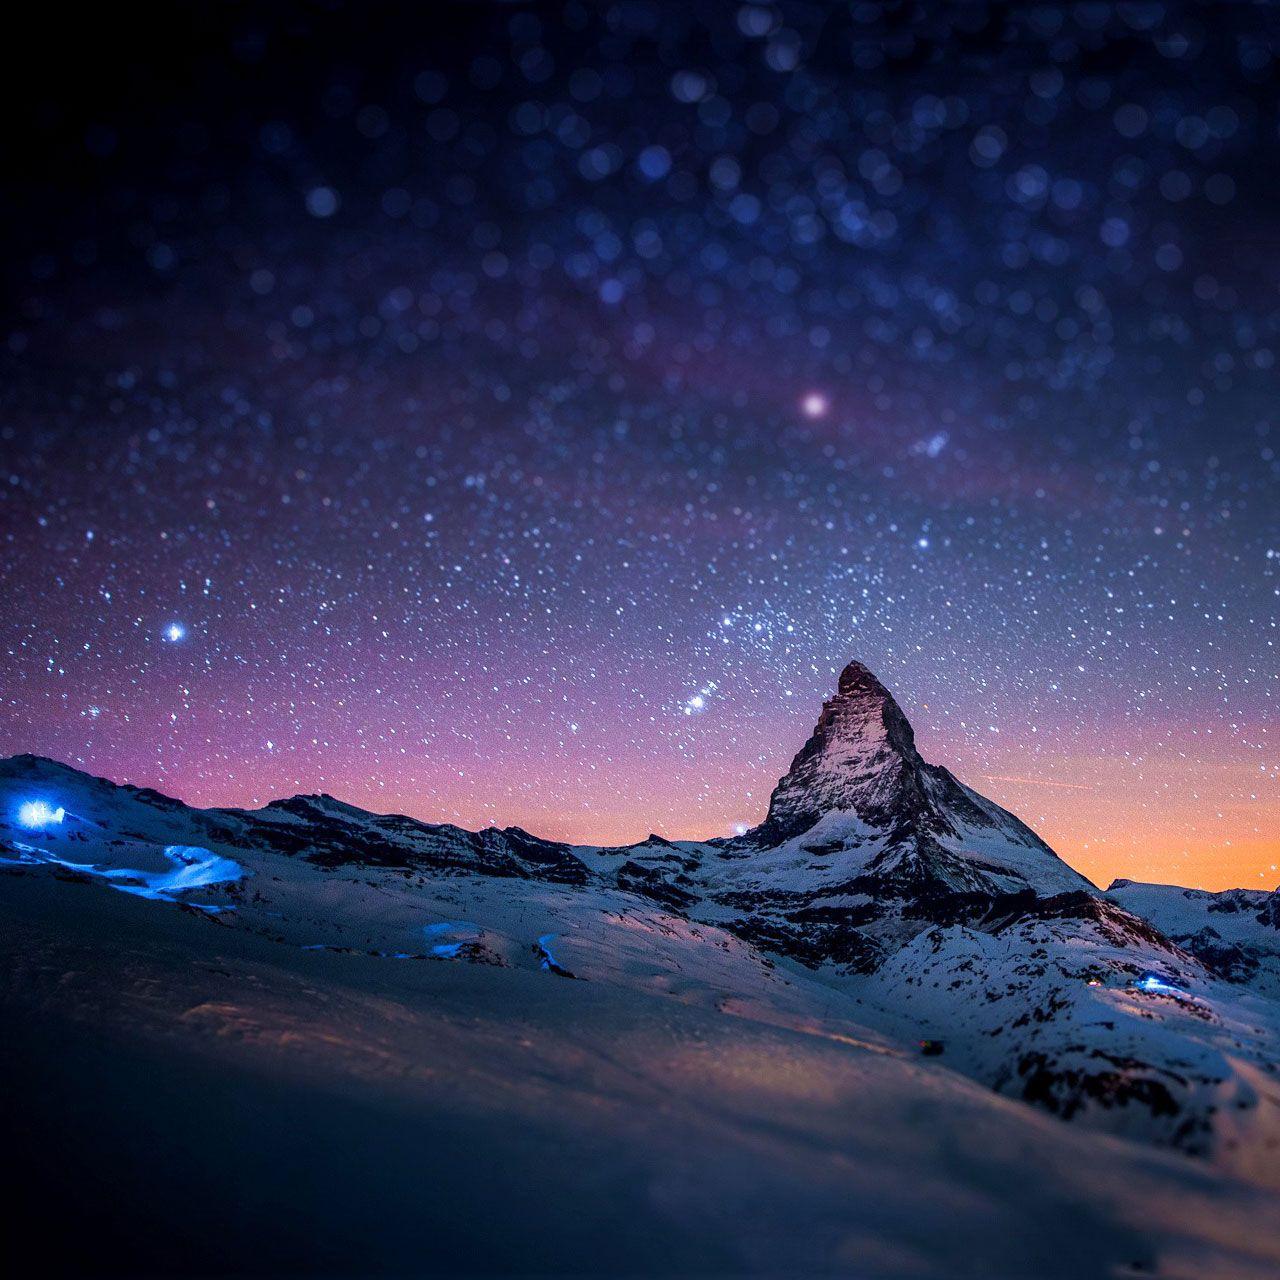 Stars And Snow Night In The Alps Samsung Galaxy Tab 10 wallpaper